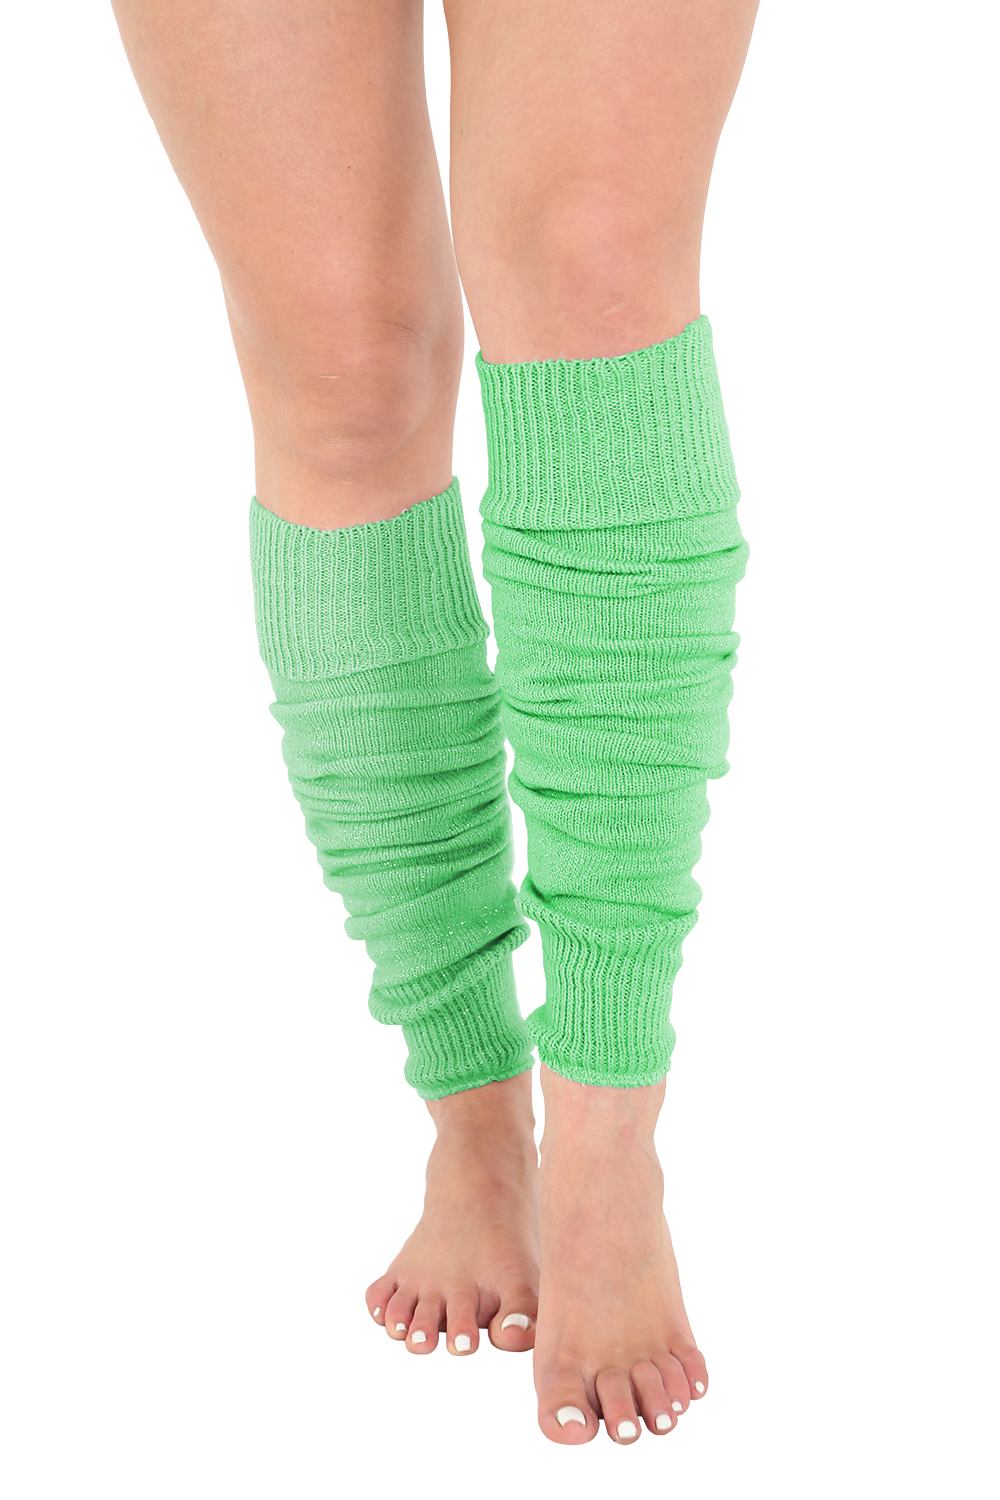 Crazy Chick Plain Green Legwarmers (Pack of 12)